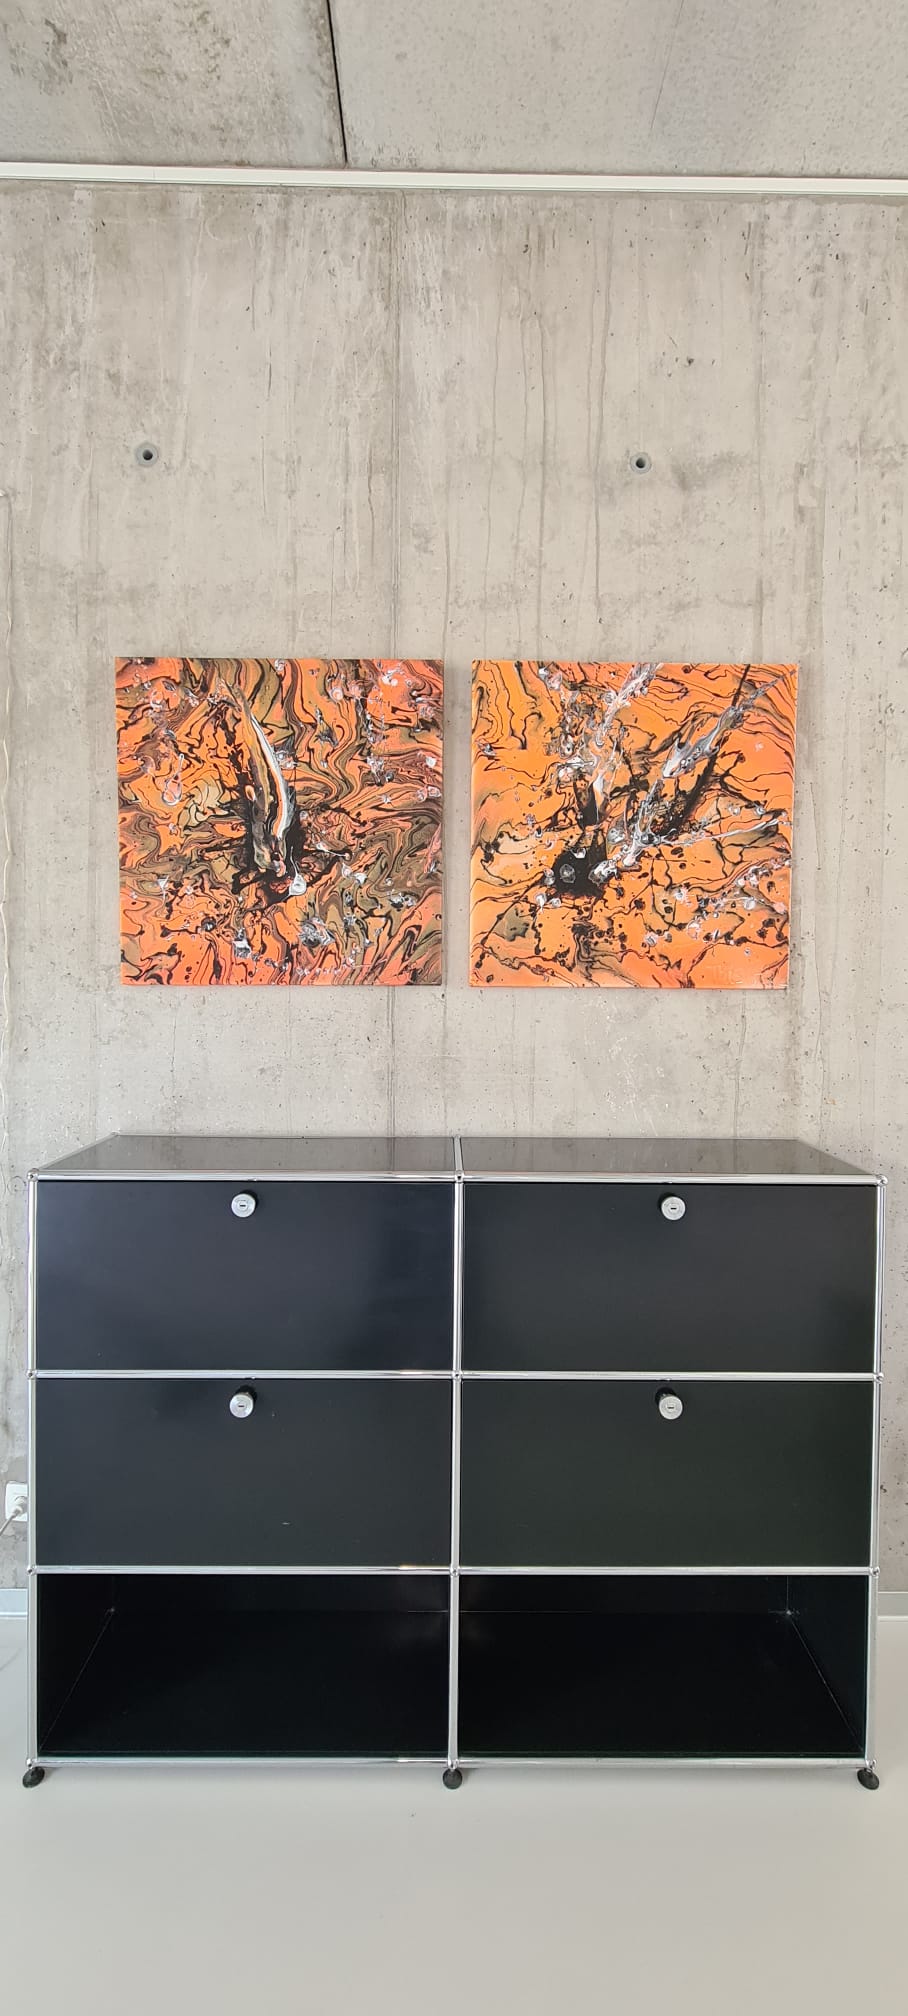 On Fire I & II – Resin with acrylics on canvas – 70x70cm – 1500 euro each